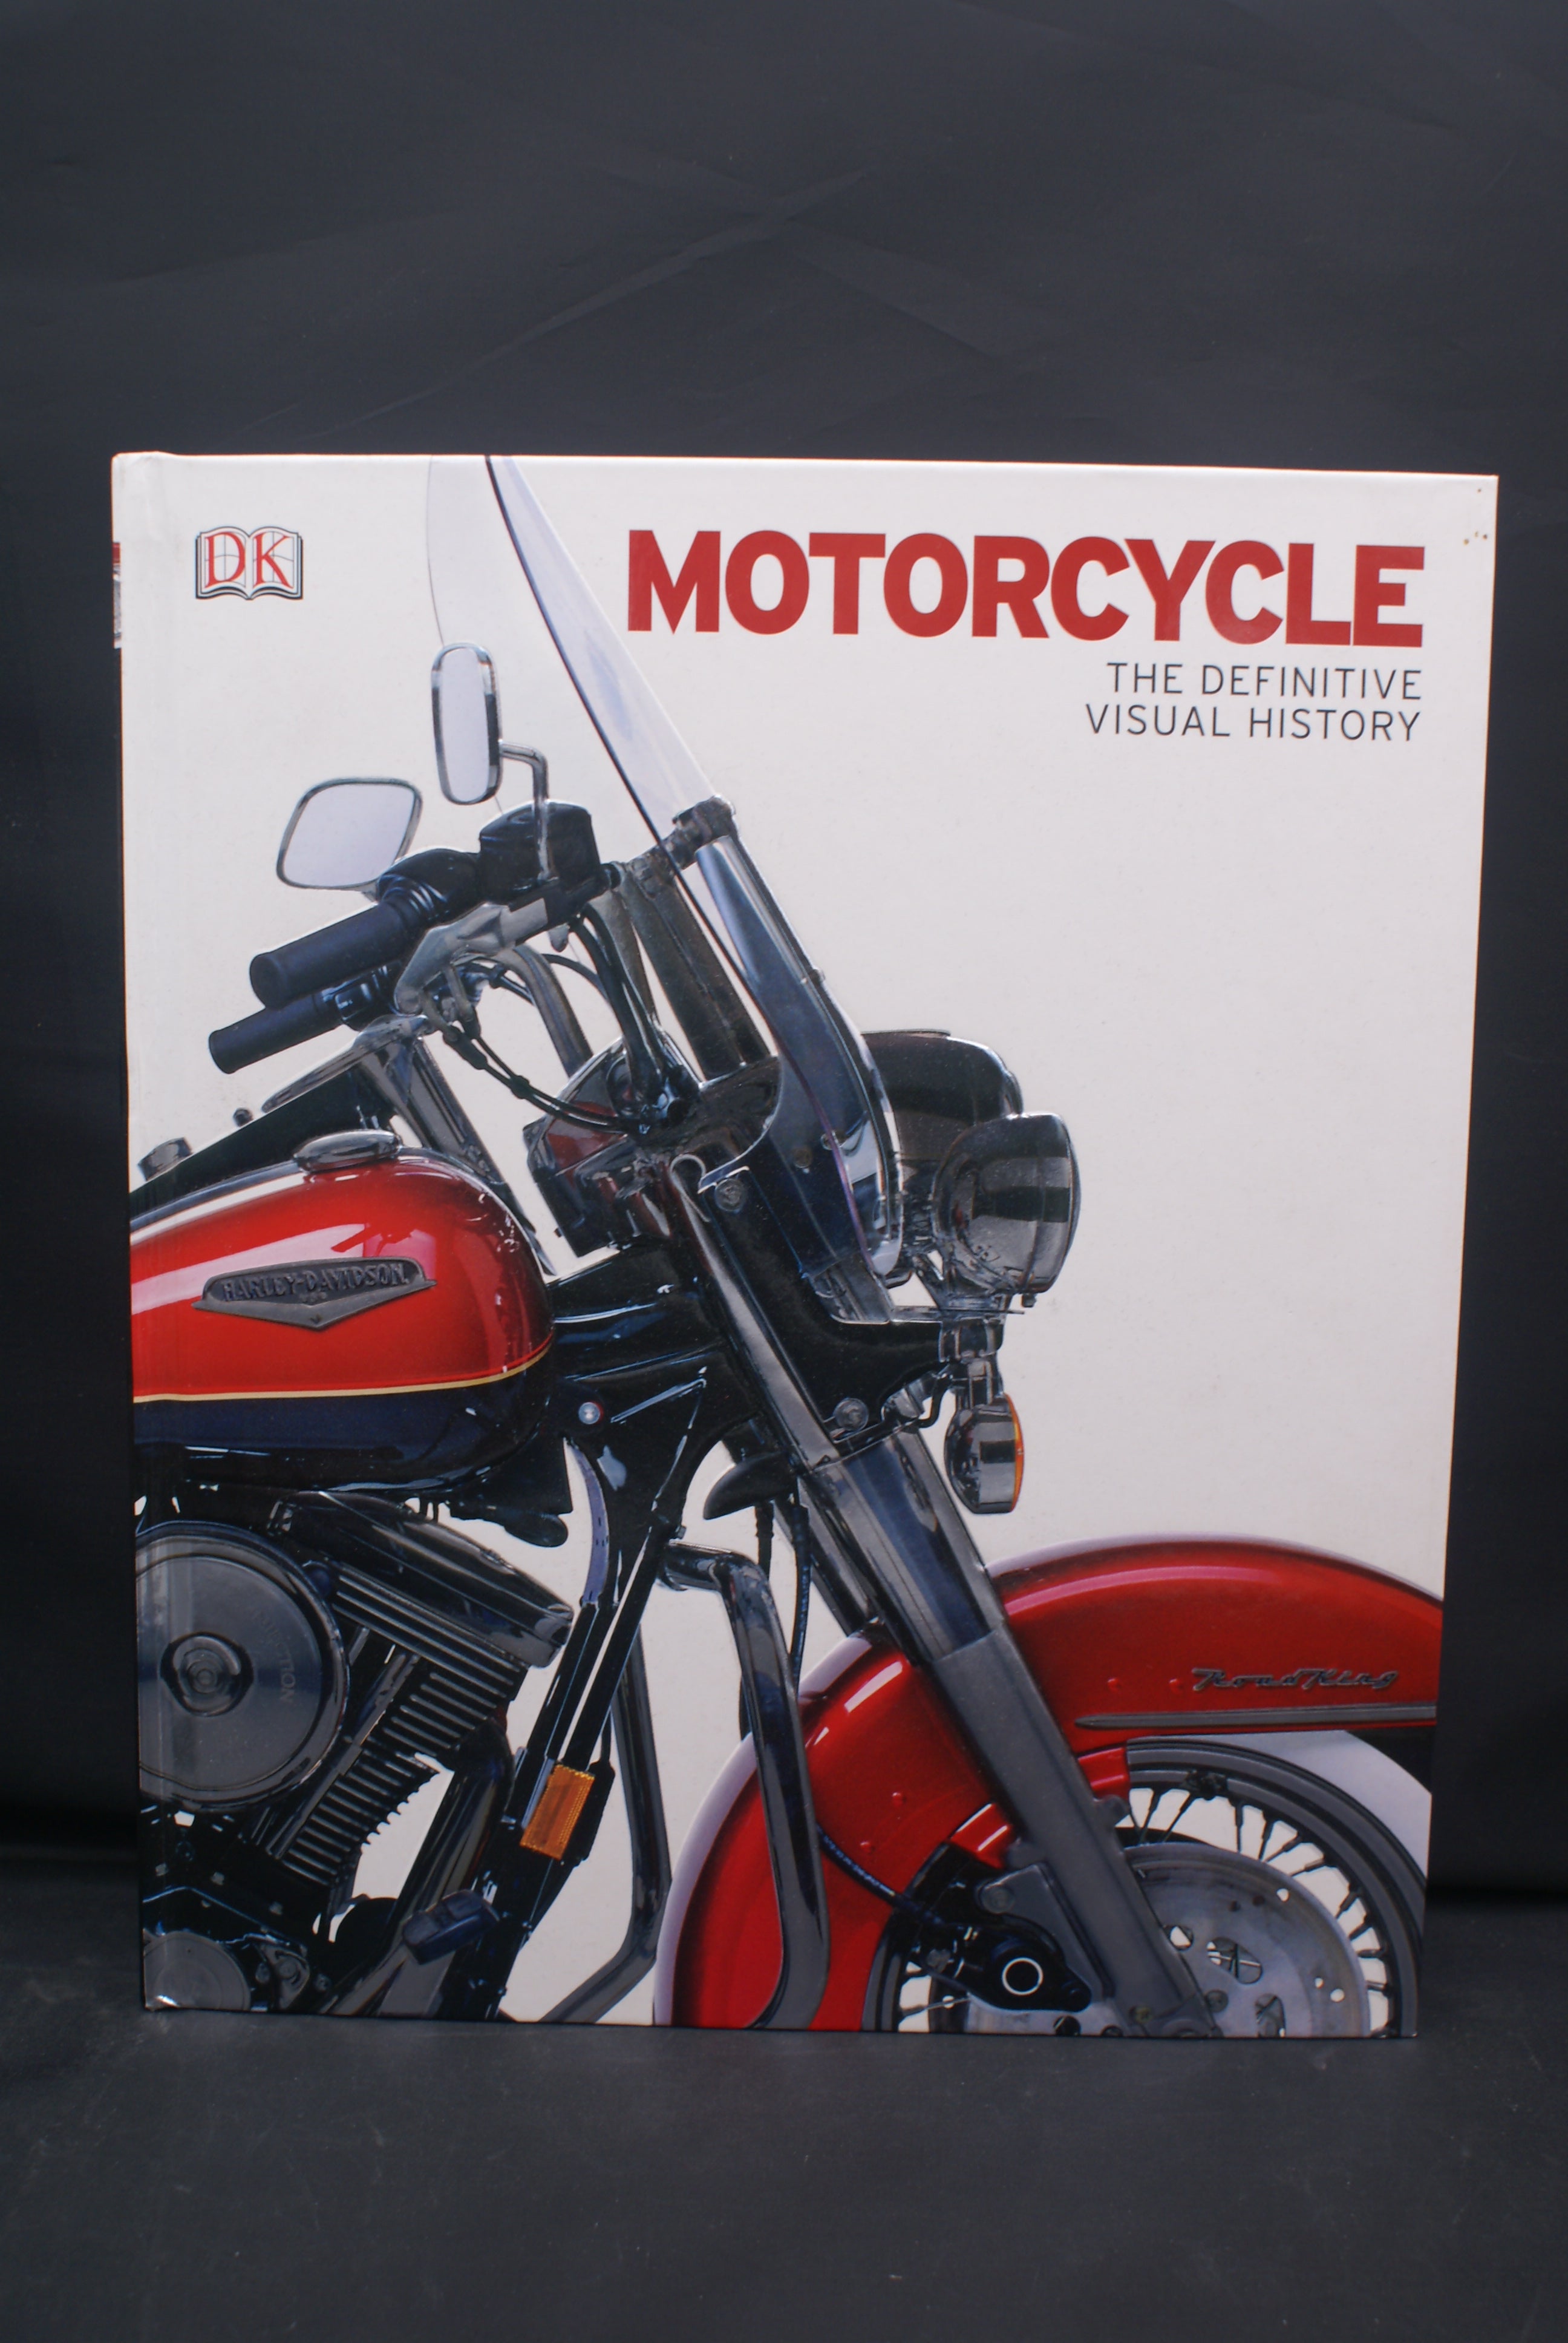 Motorcycle, The Definitive Visual History